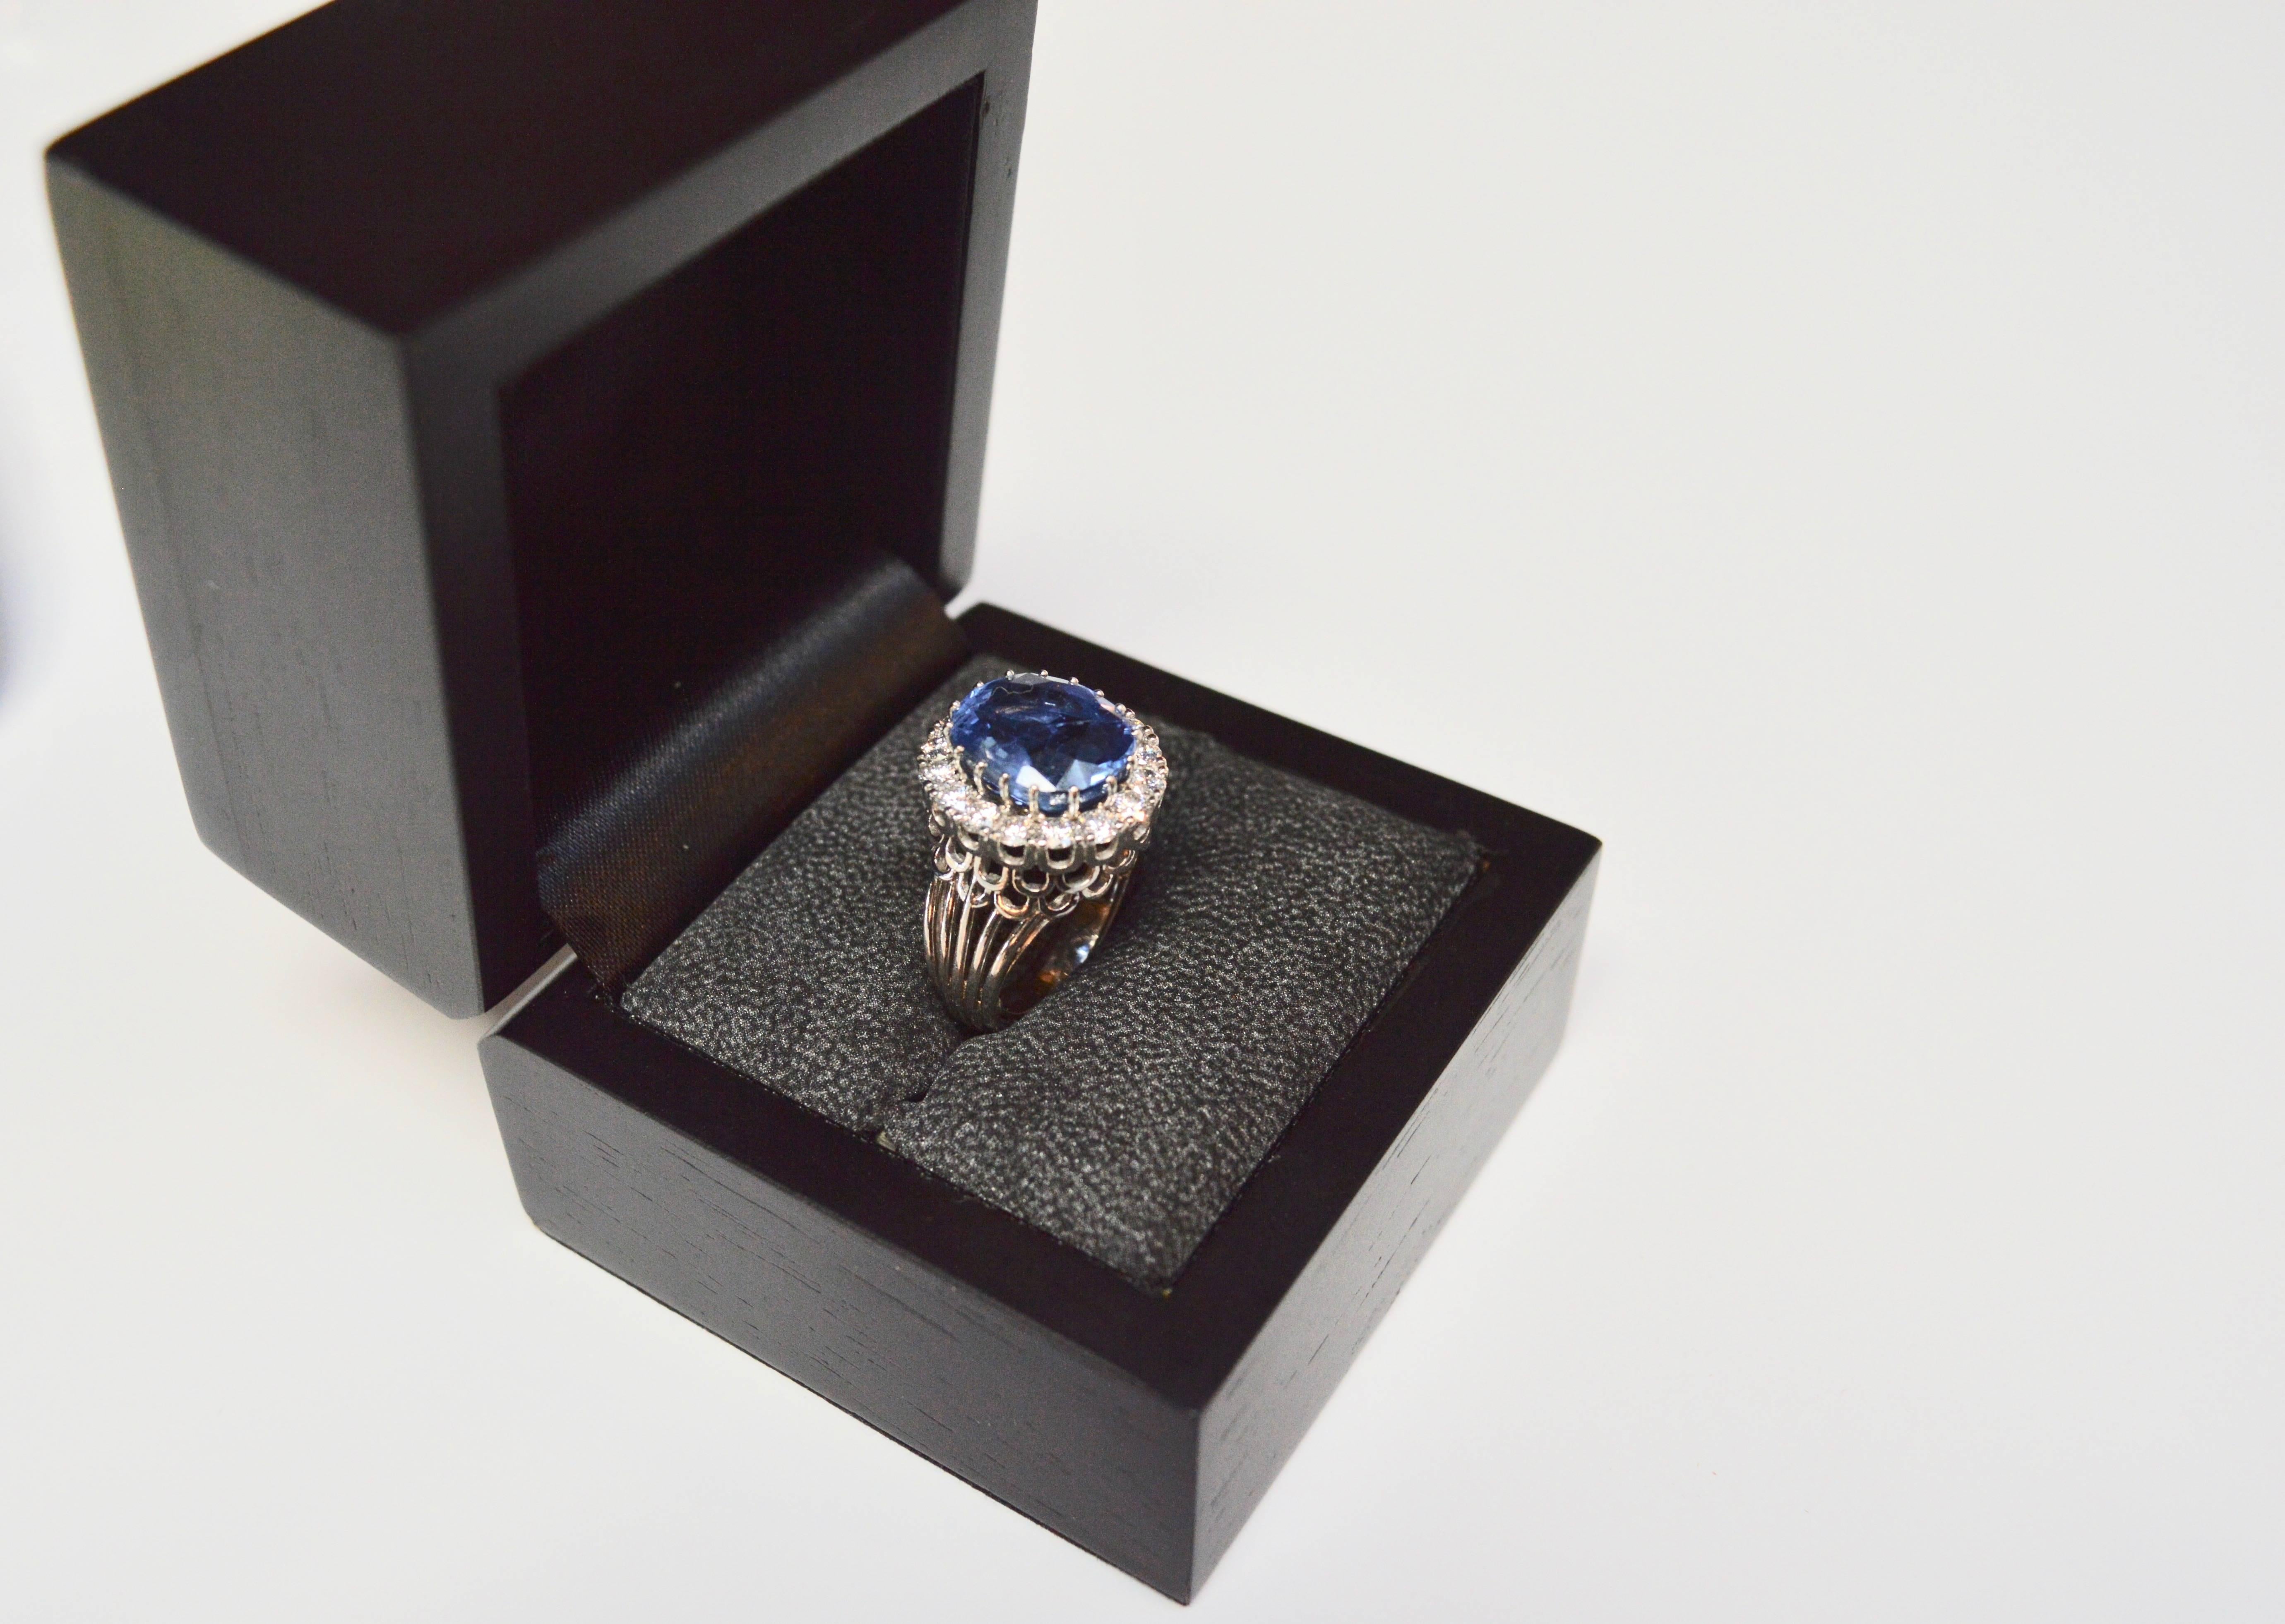 Stunning vintage handmade Sapphire and diamond ring on a platinum band/setting. Oval shaped mixed cut, natural Sapphire approximately 9.1-carats. Medium blue color, moderately included, good cut. No treatment to stone. Along with 16 full cut round